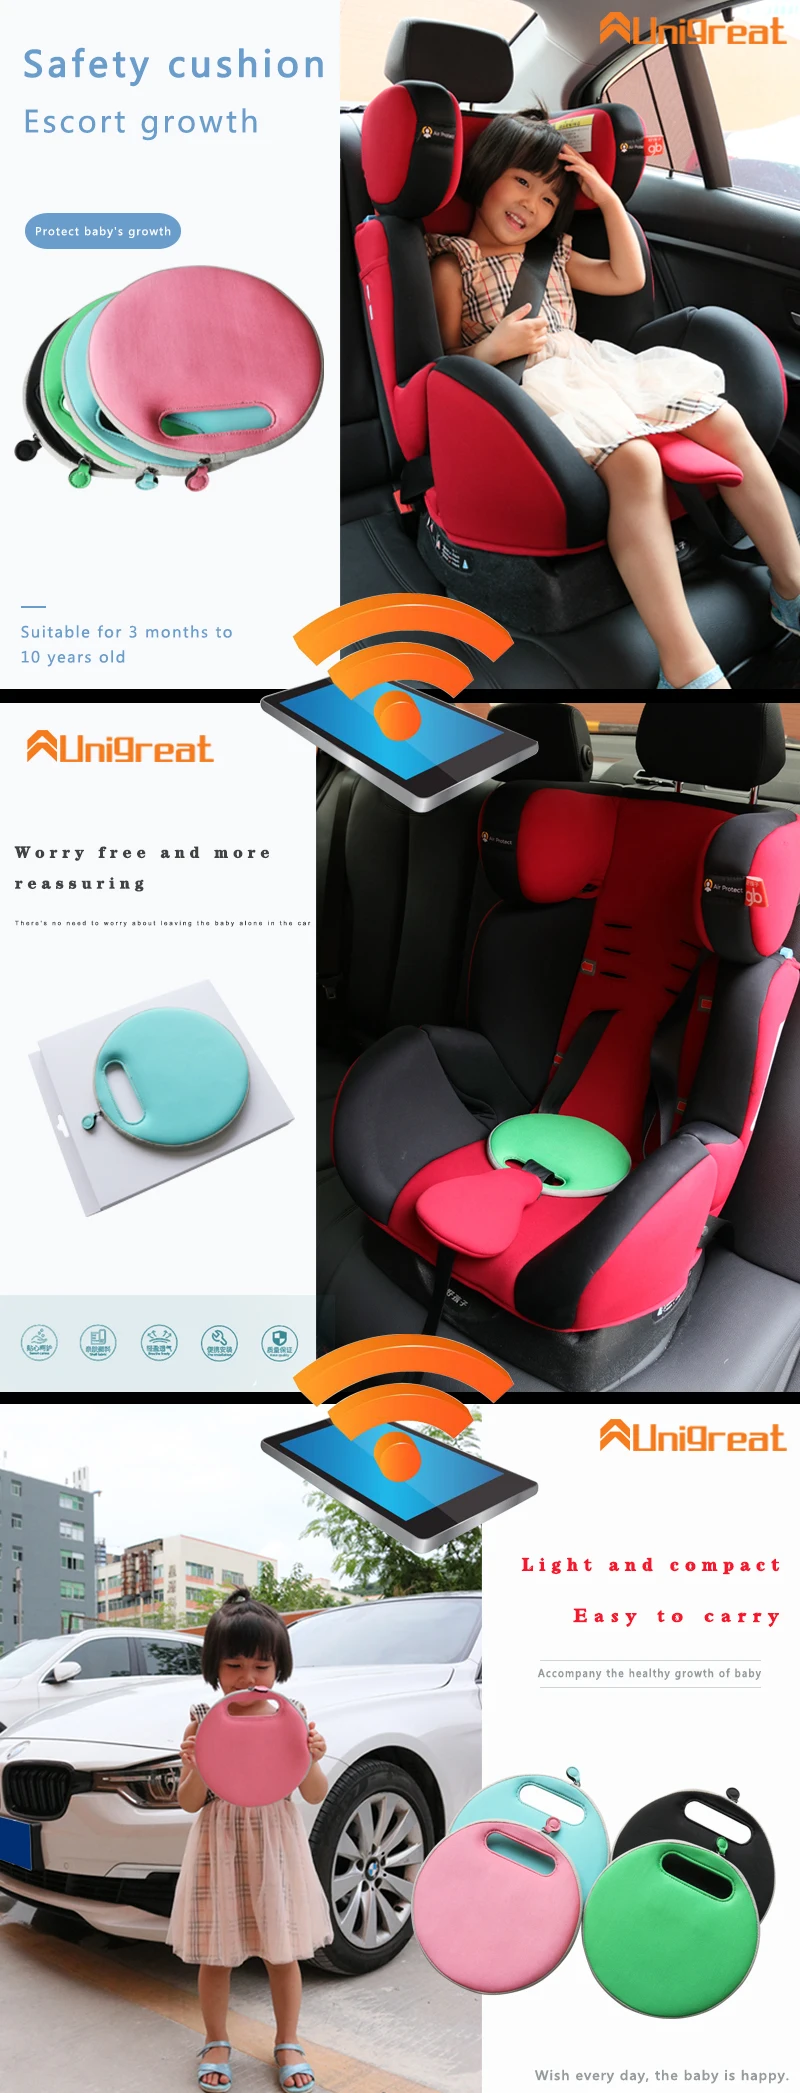 New arrival Anti-forget anti-abandon safety child kid baby in car seat alarm warning cushion mat pad weight sensor